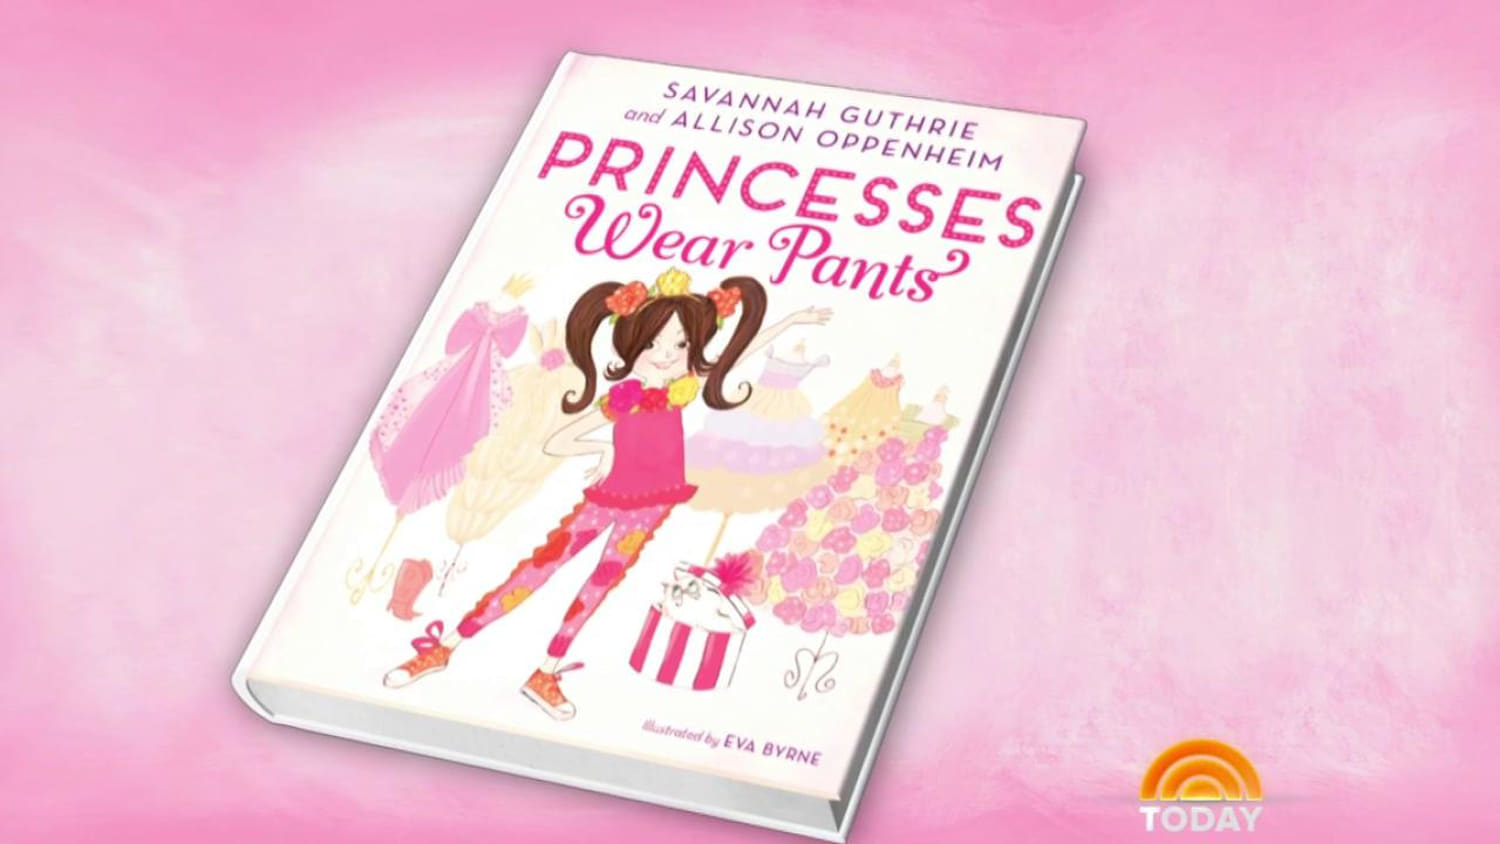 Princesses Wear Pants' teaches girls that sparkles aren't everything